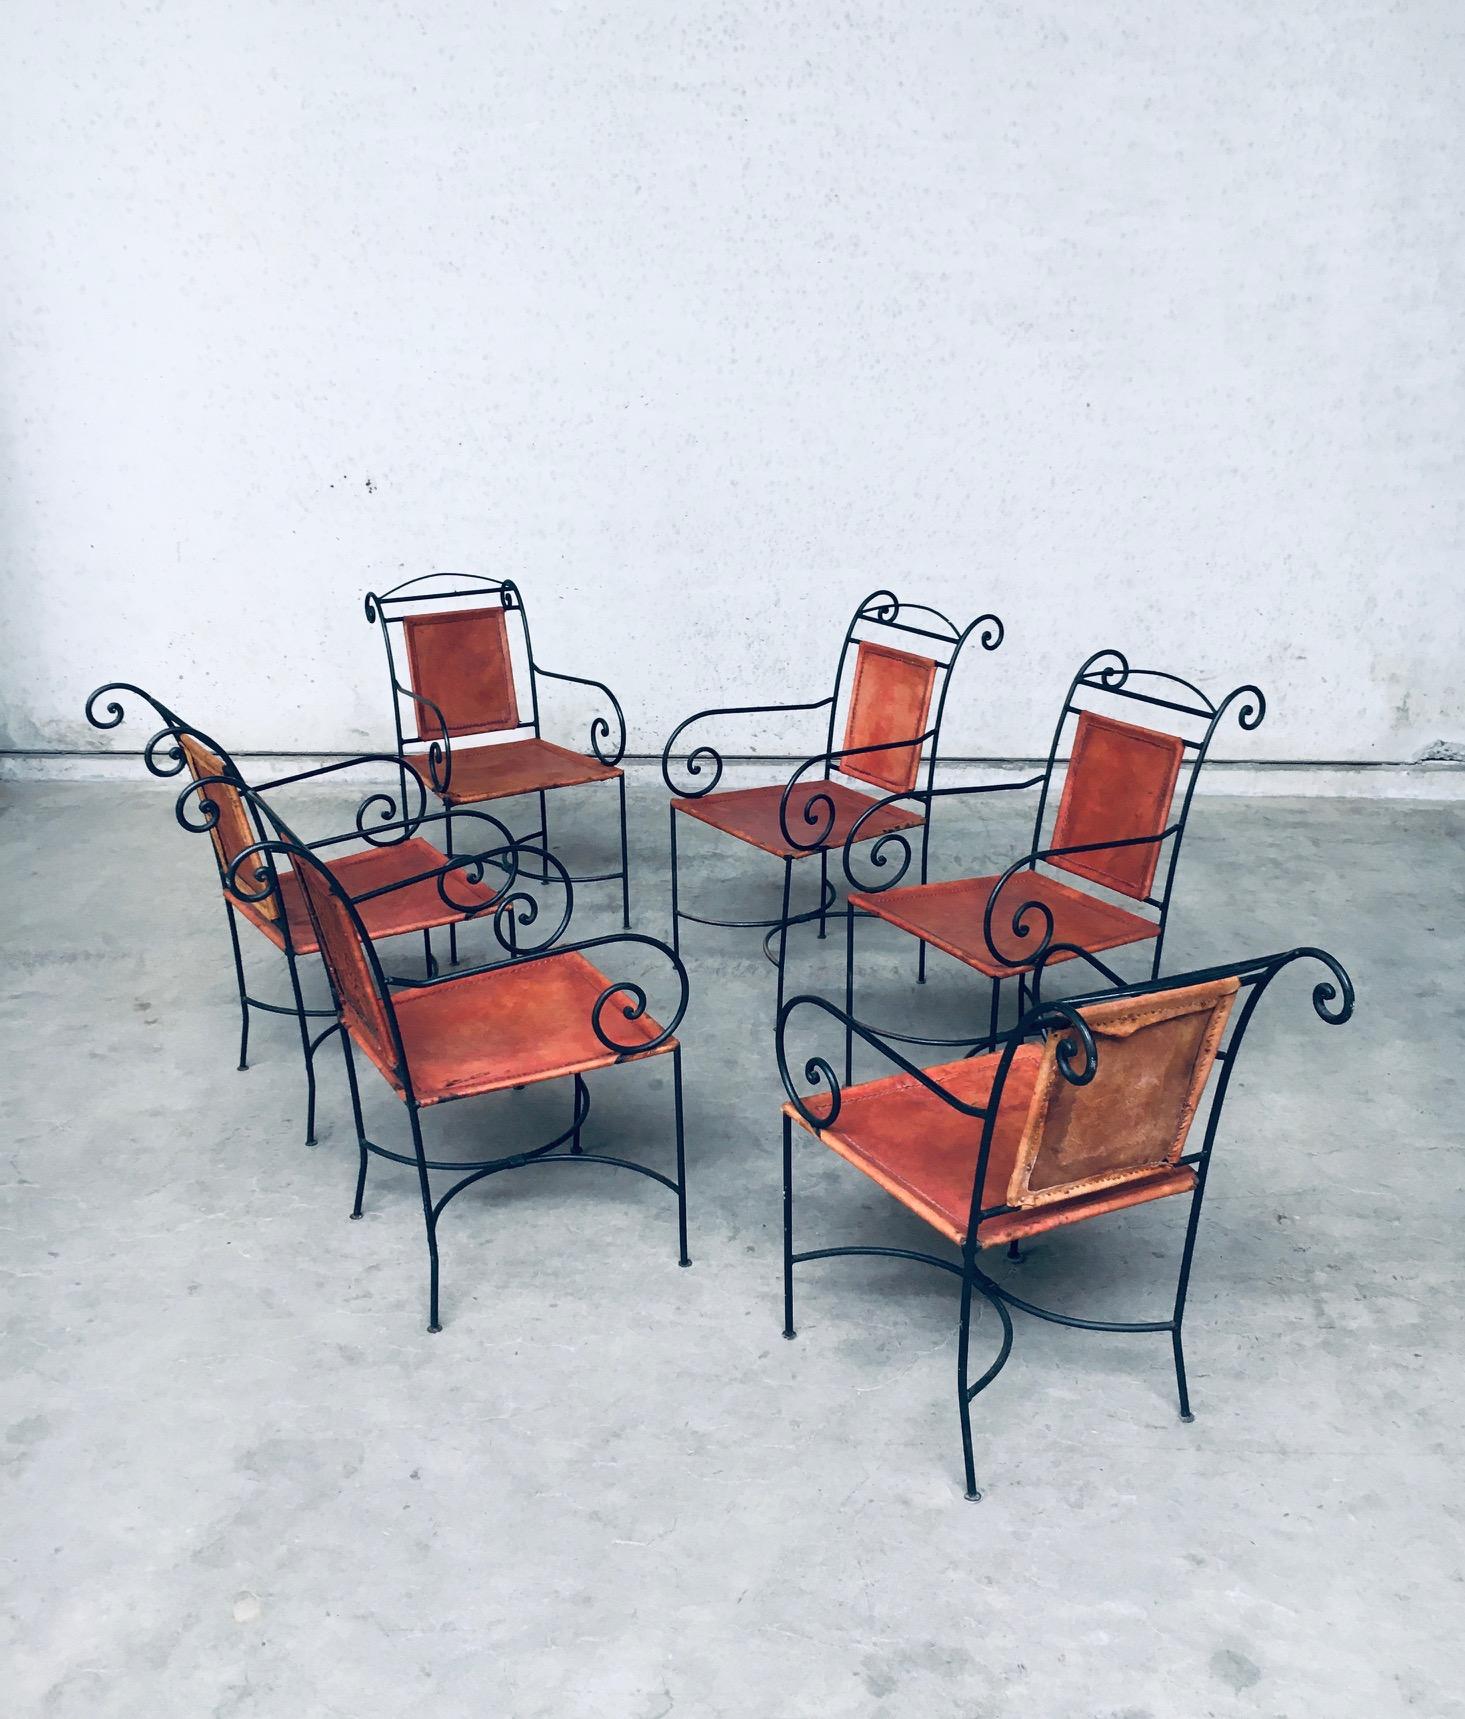 Mid-20th Century Wrought Iron and Cognac Leather Swirl Dining Chair Set, Spain, 1960's For Sale